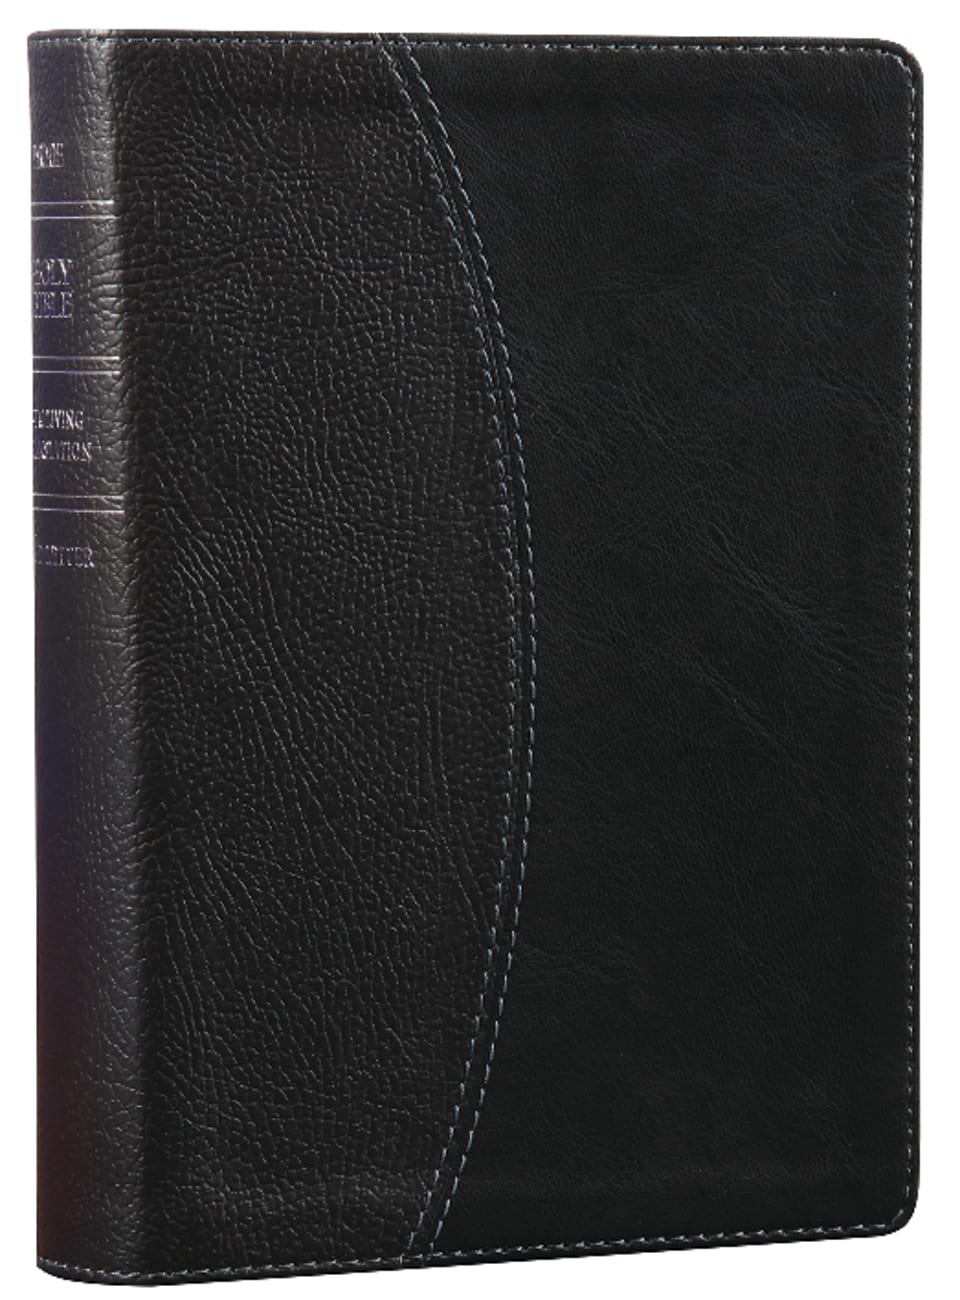 NLT Compact Large Print Bible Black Onyx (Red Letter Edition) Imitation Leather